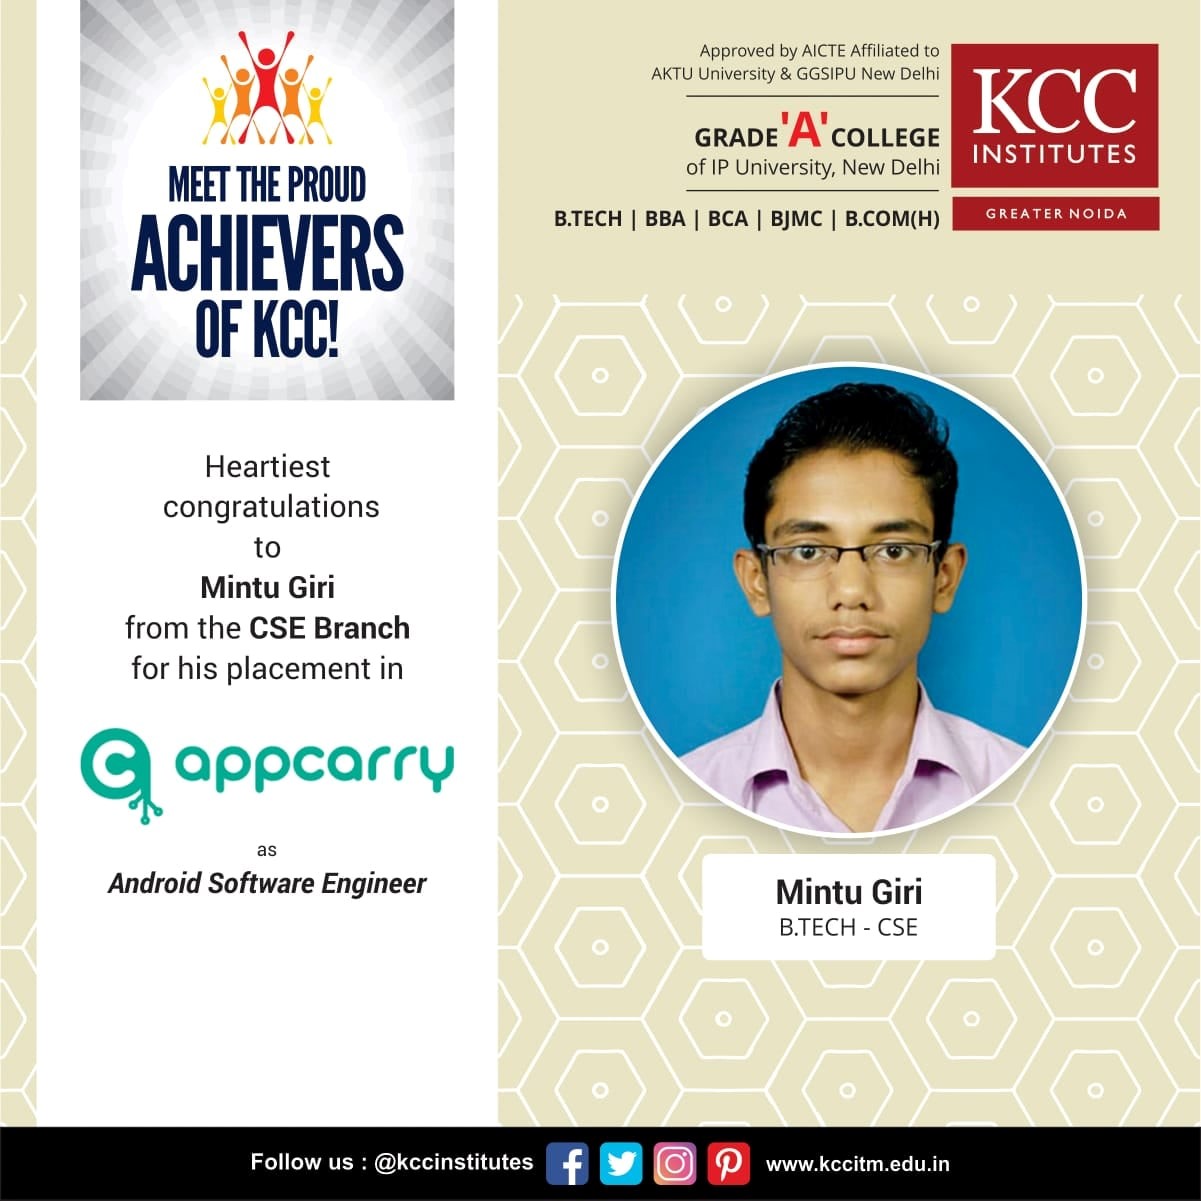 Congratulations Mintu Giri from Btech CSE Branch for getting placed in AppCarry as Android Software Engineer.